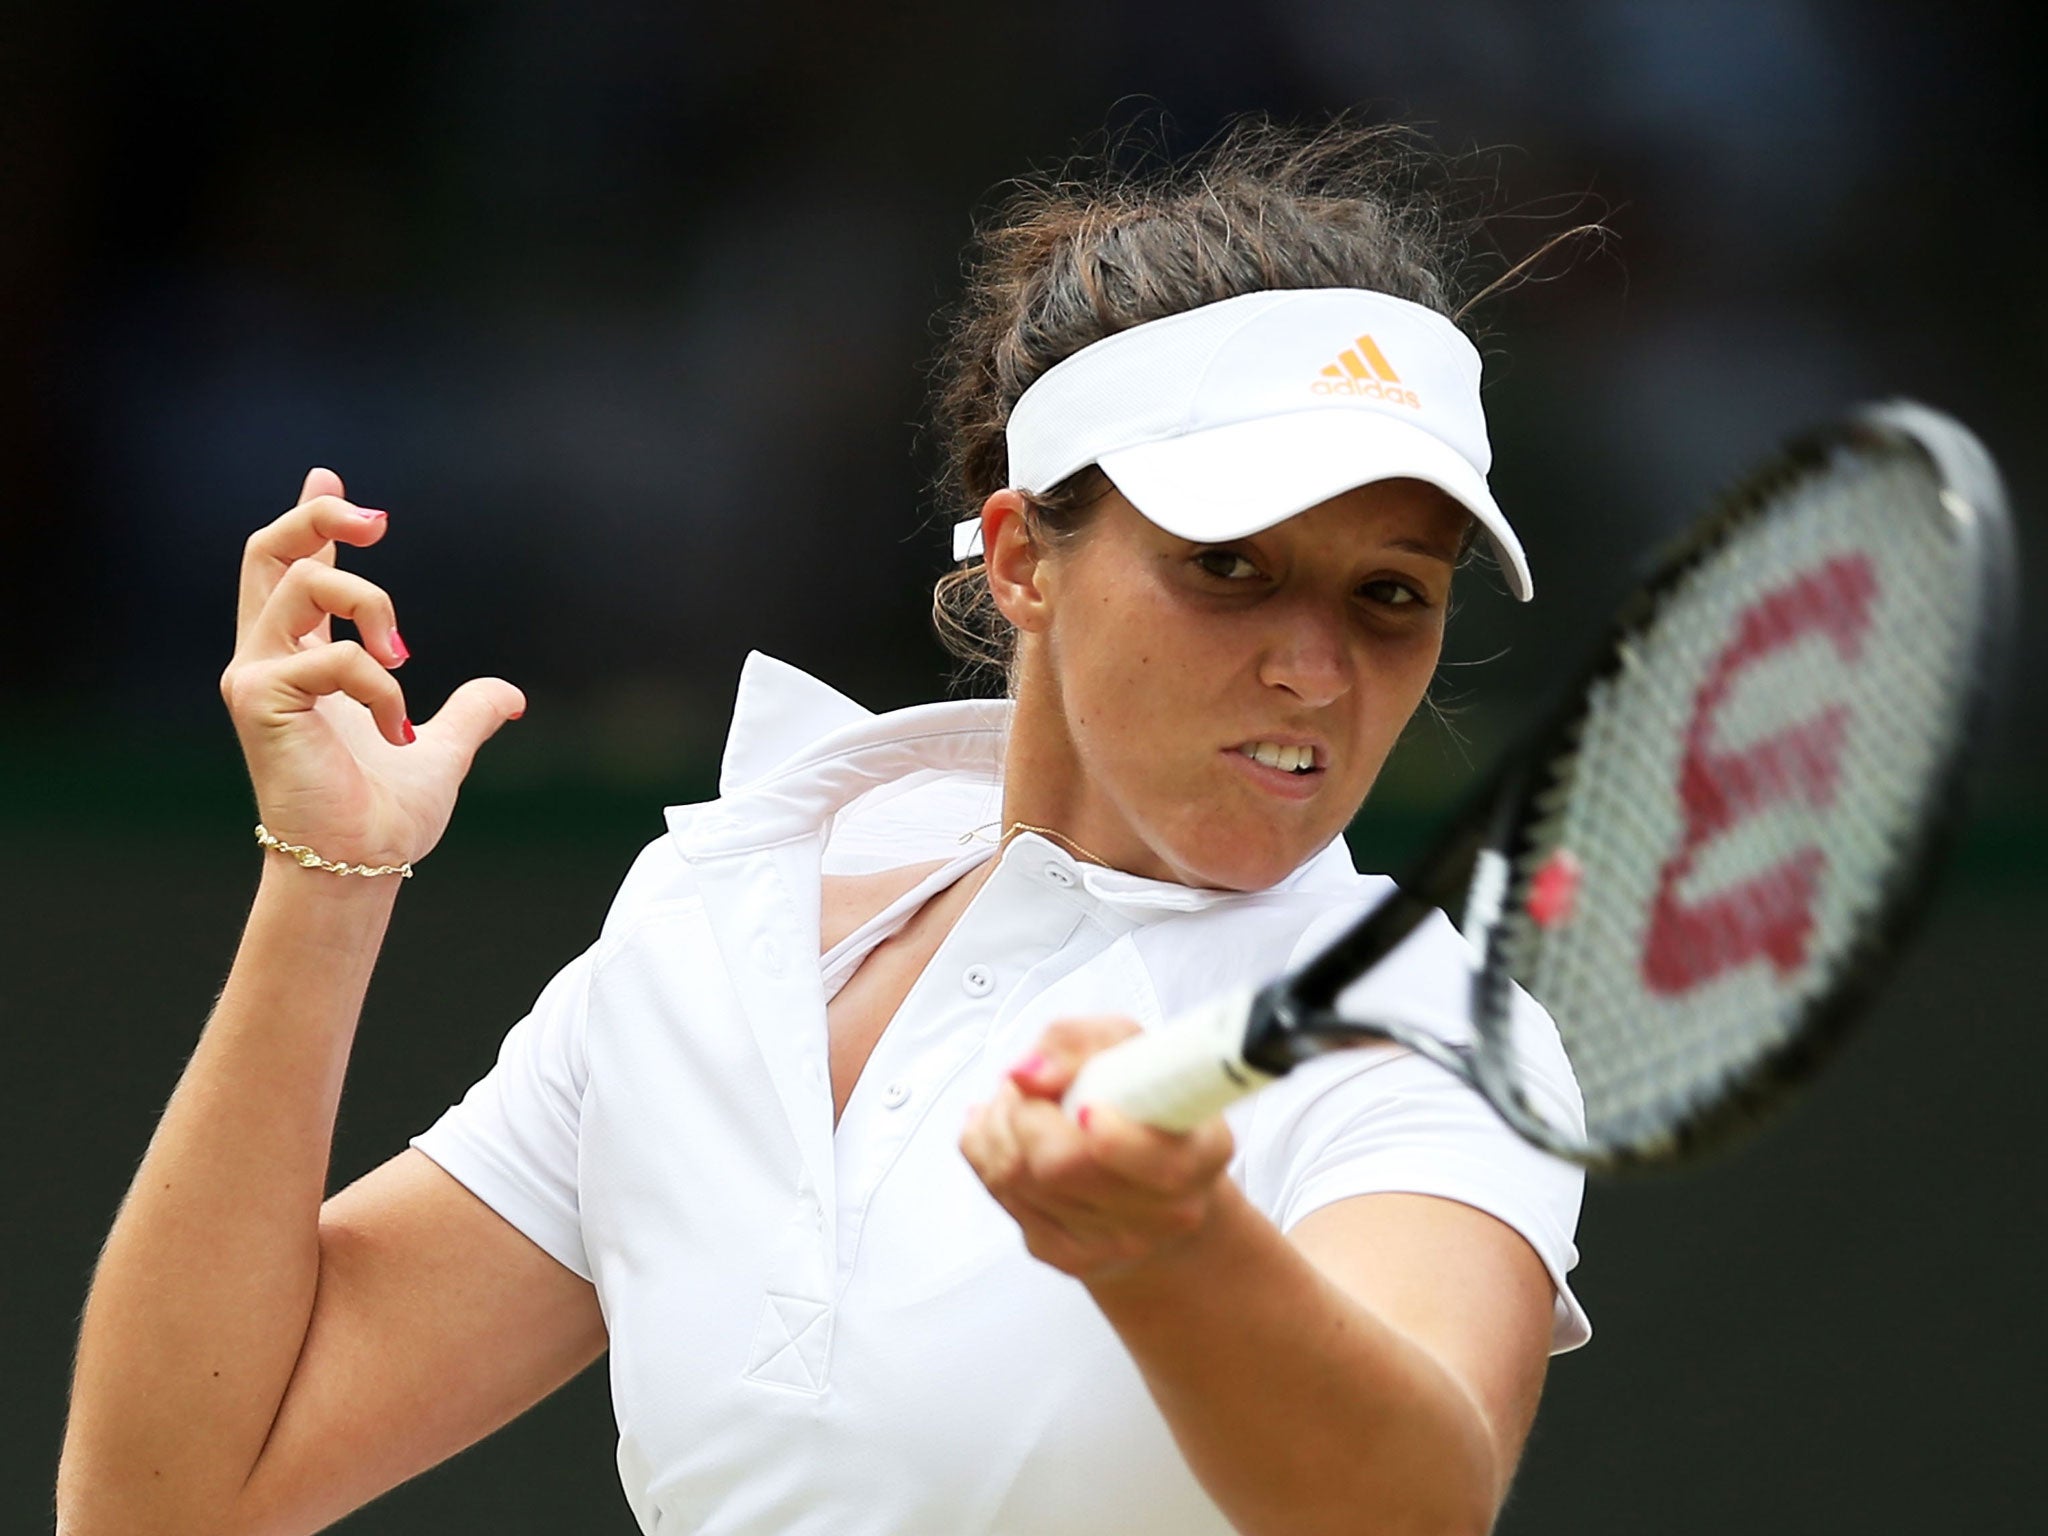 Laura Robson becomes the first British woman in the top 30 since Jo Durie in 1987